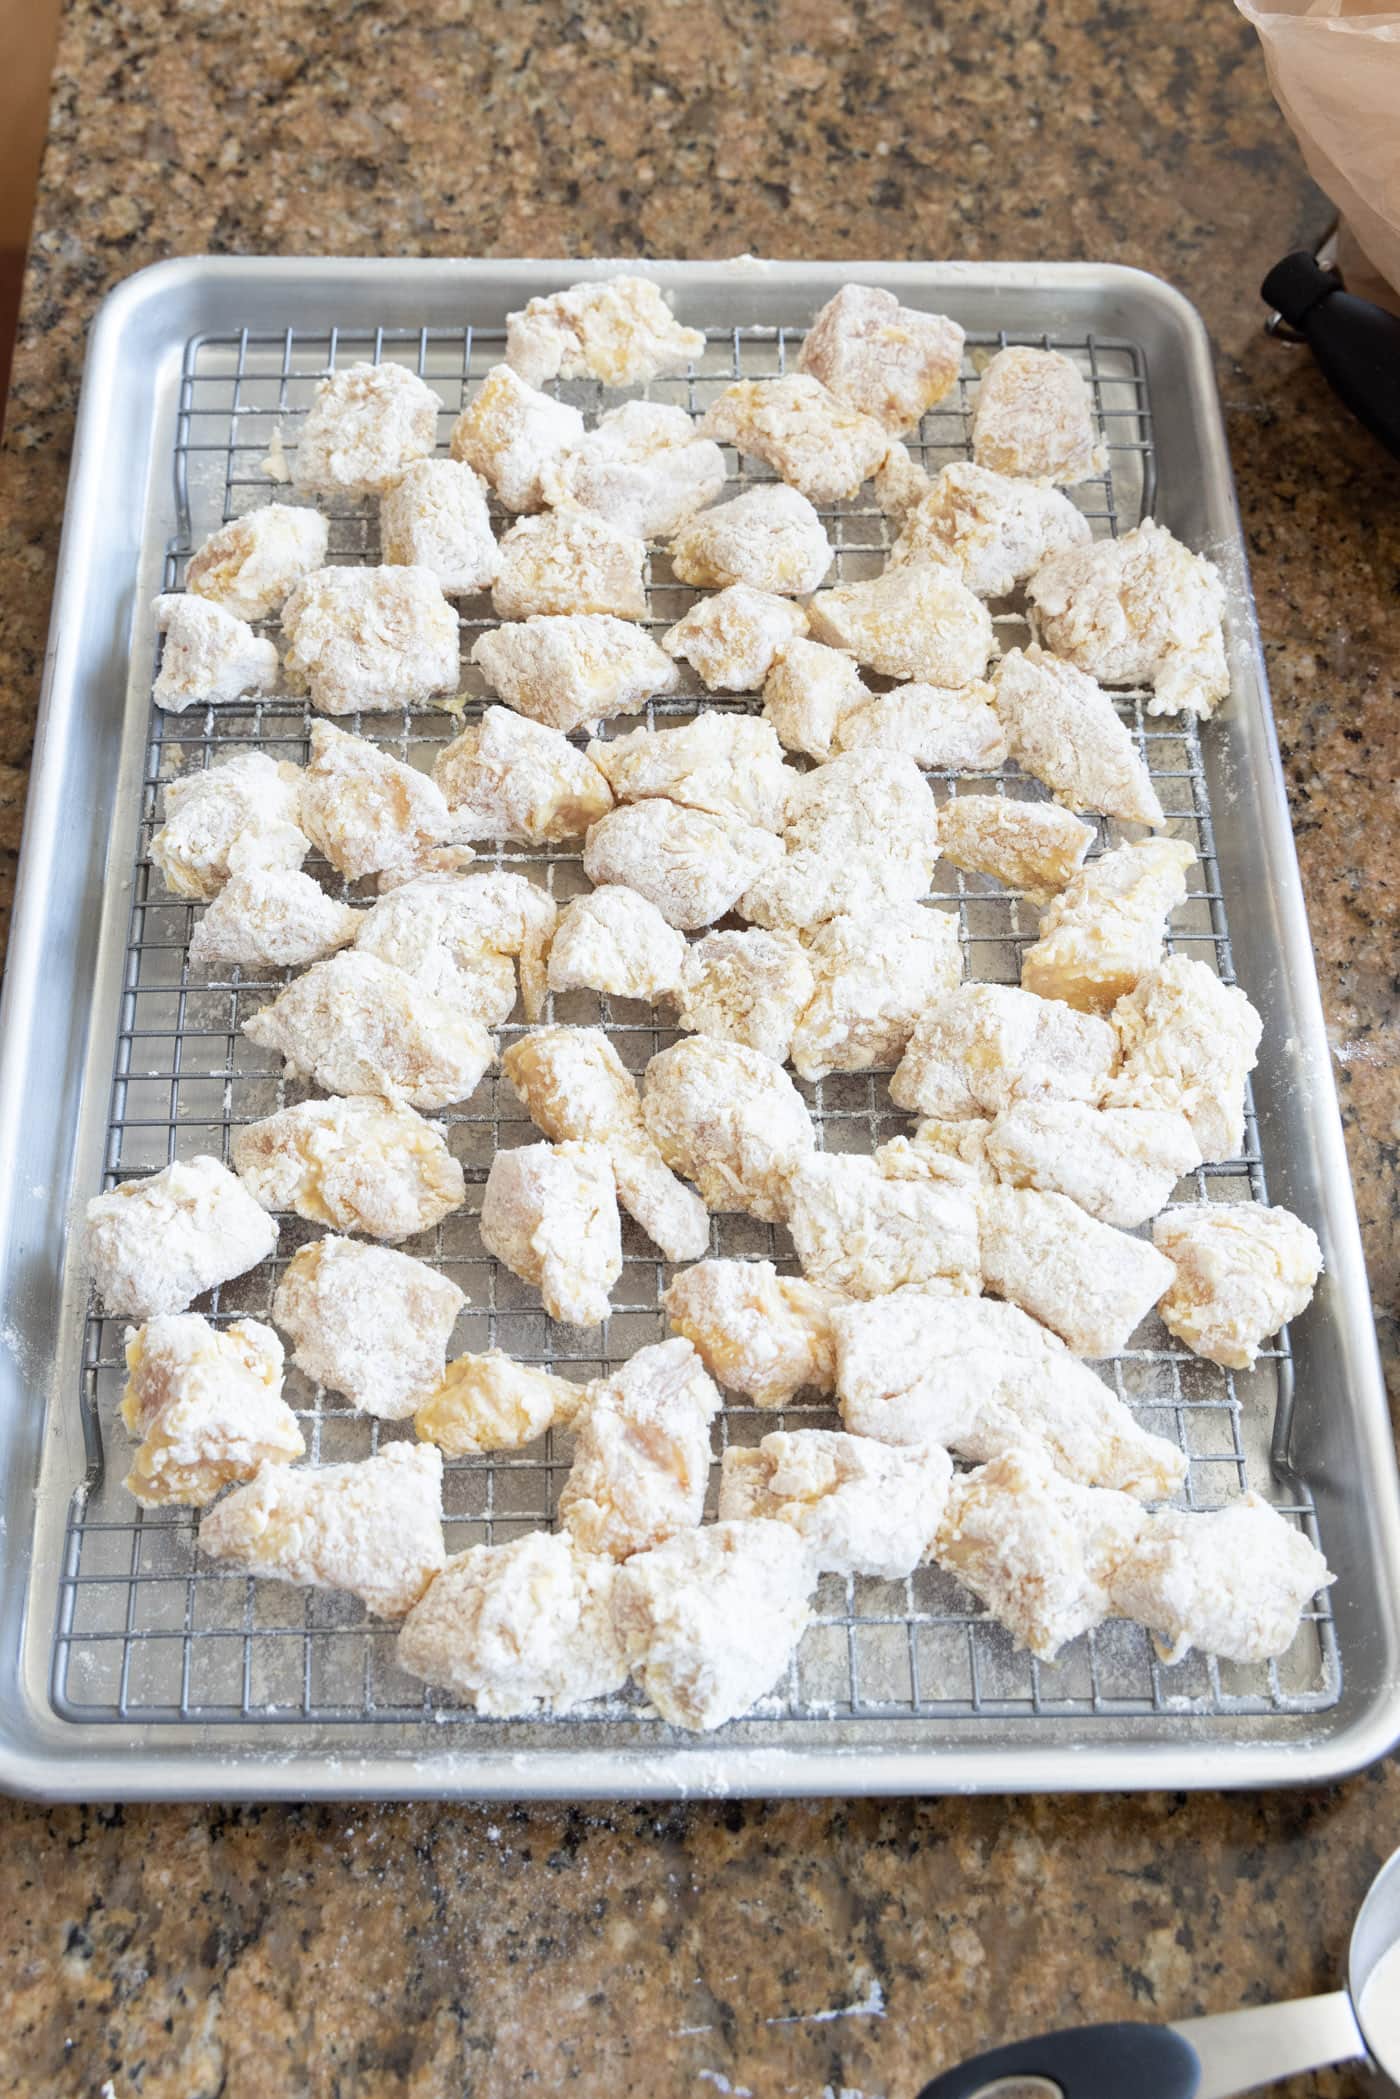 flour and egg dredged chicken pieces on a wire rack